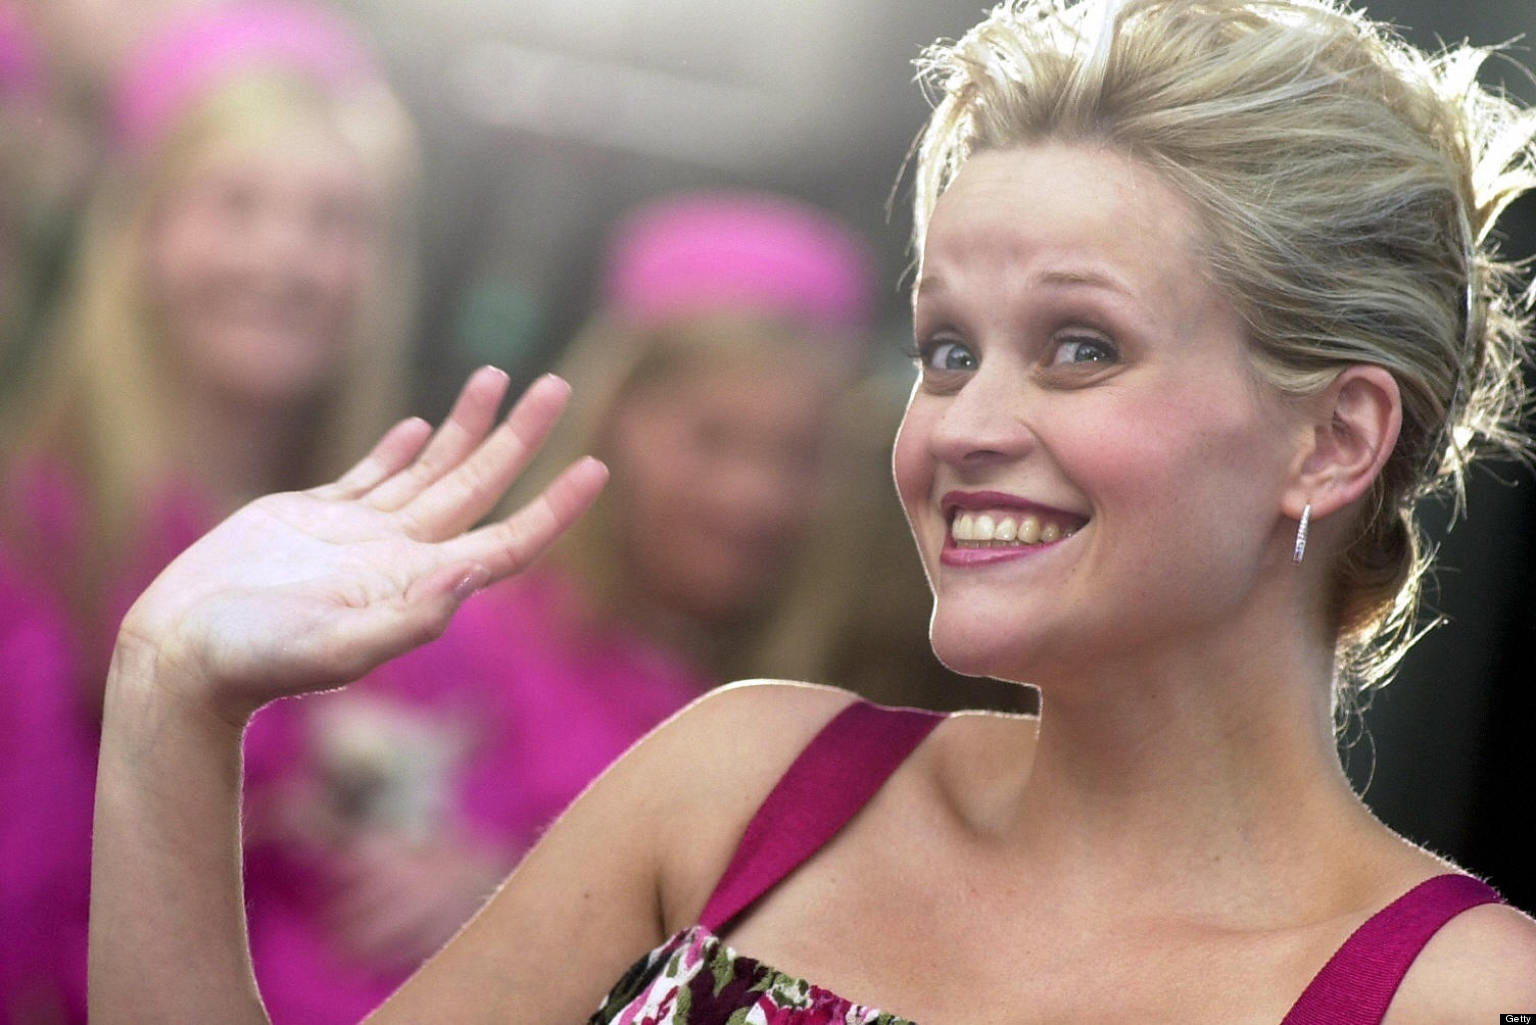 Elle Woods Or Reese Witherspoon During Her Arrest? HuffPost